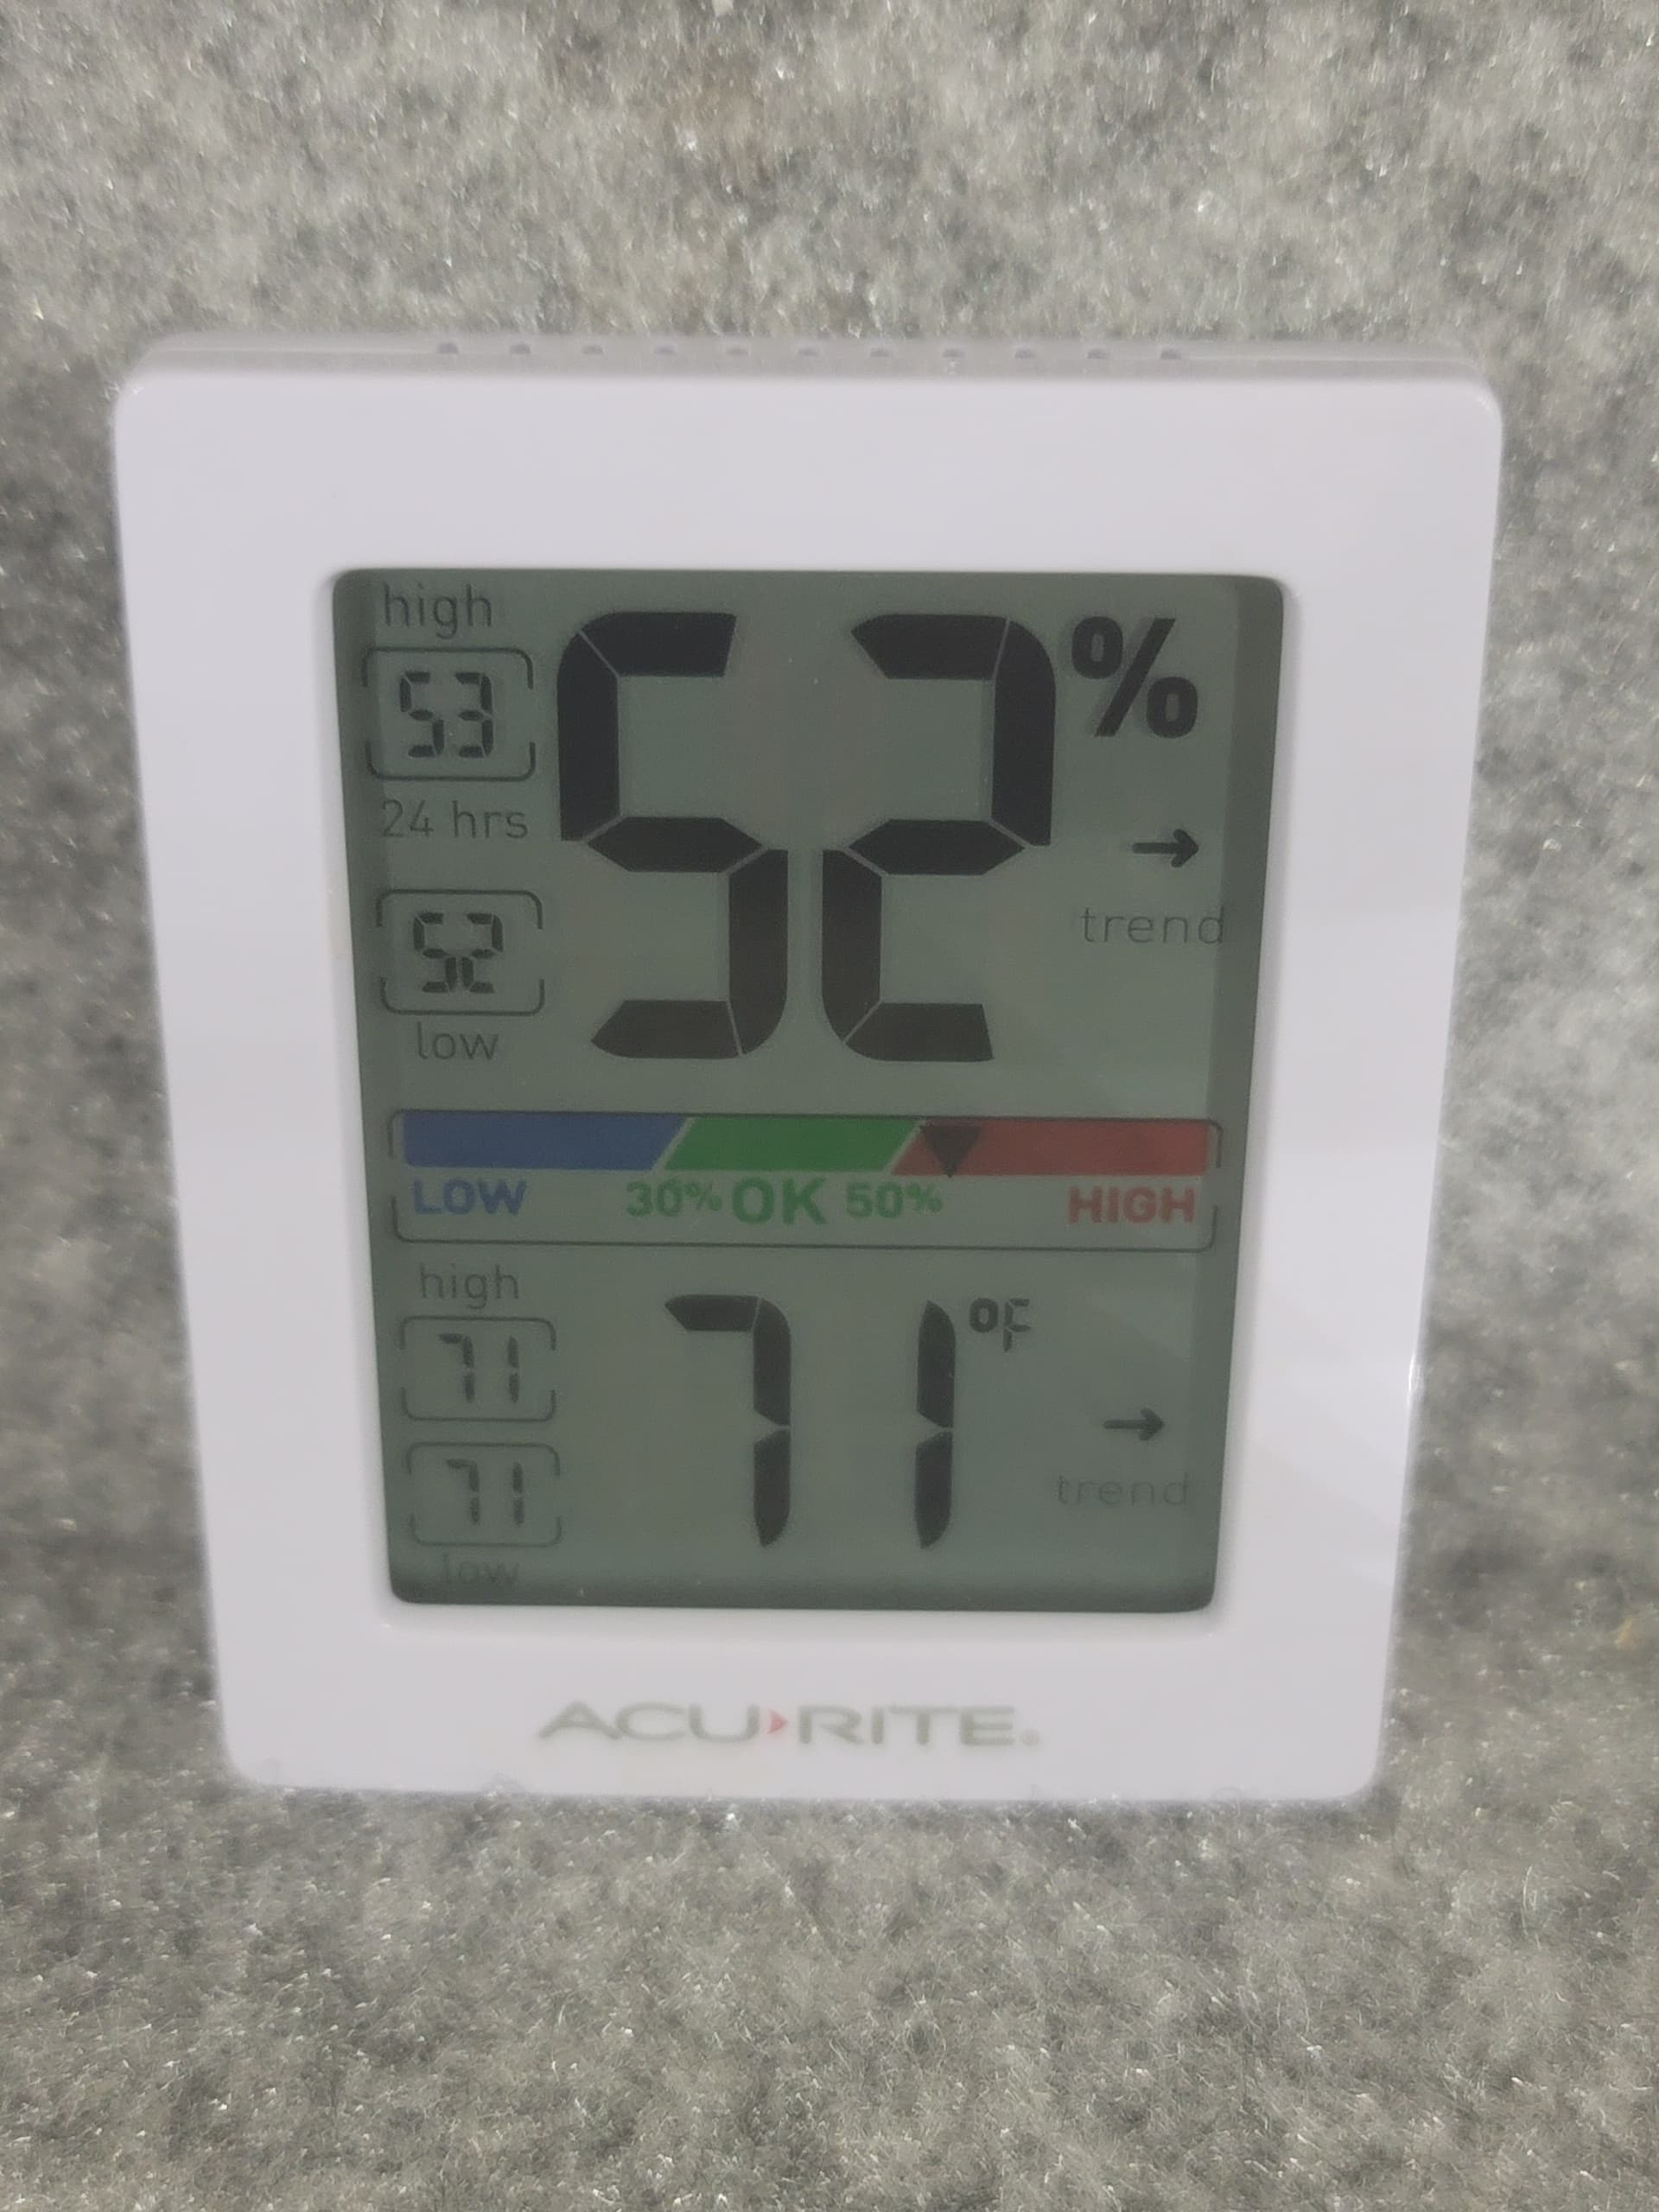 AcuRite Pro Accuracy Indoor Temperature and Humidity Monitor